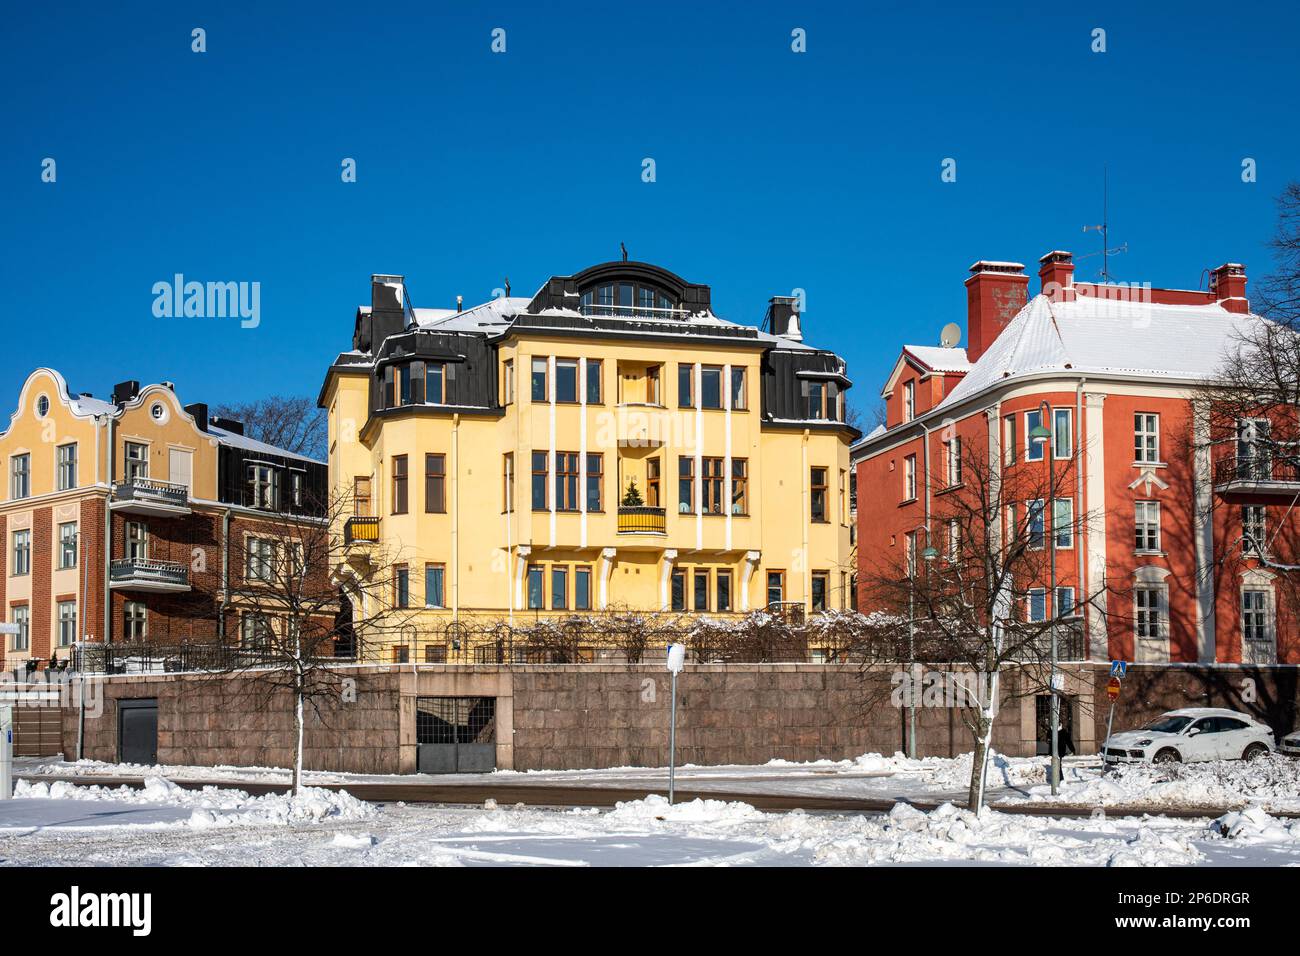 Residential building against clear blue sky at Wecksellintie 2 in Eira district of Helsinki, Finland Stock Photo